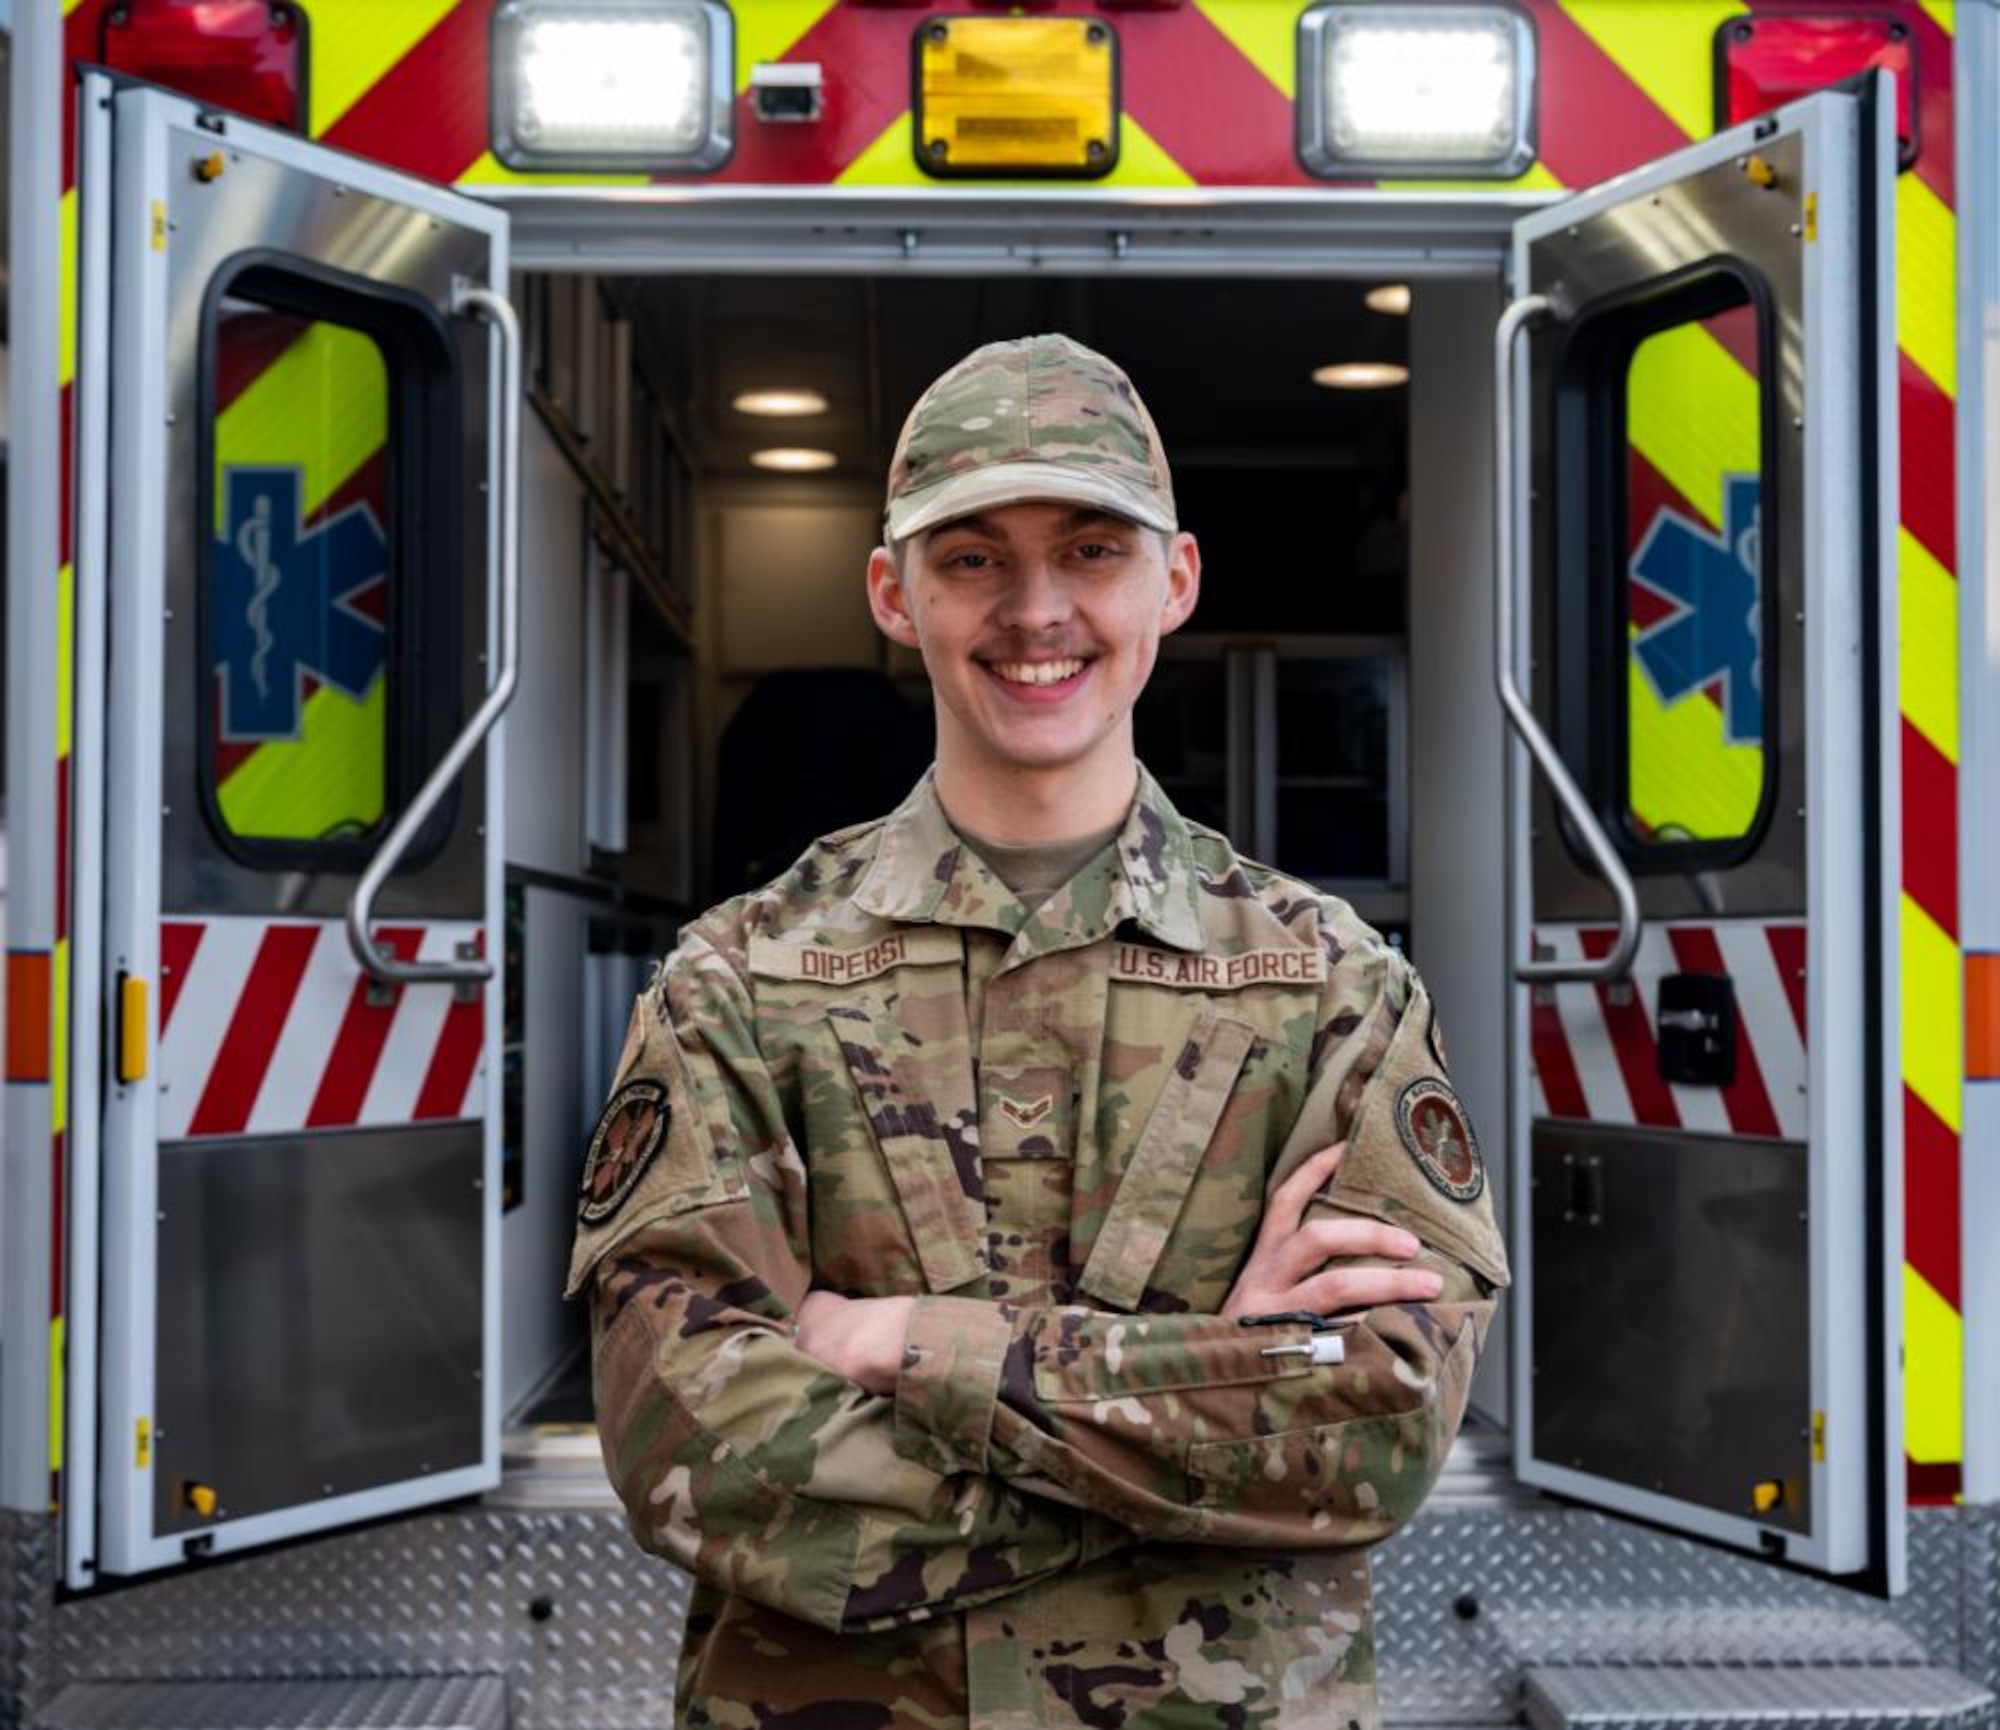 Airman 1st Class Bryan DiPersi, 436th Healthcare Operations Squadron ambulance response team member, poses for a photo at Dover Air Force Base, Delaware, Jan. 19, 2023. DiPersi used his emergency medical experience to provide care to a car crash victim off base. (U.S. Air Force photo by Airman 1st Class Amanda Jett)